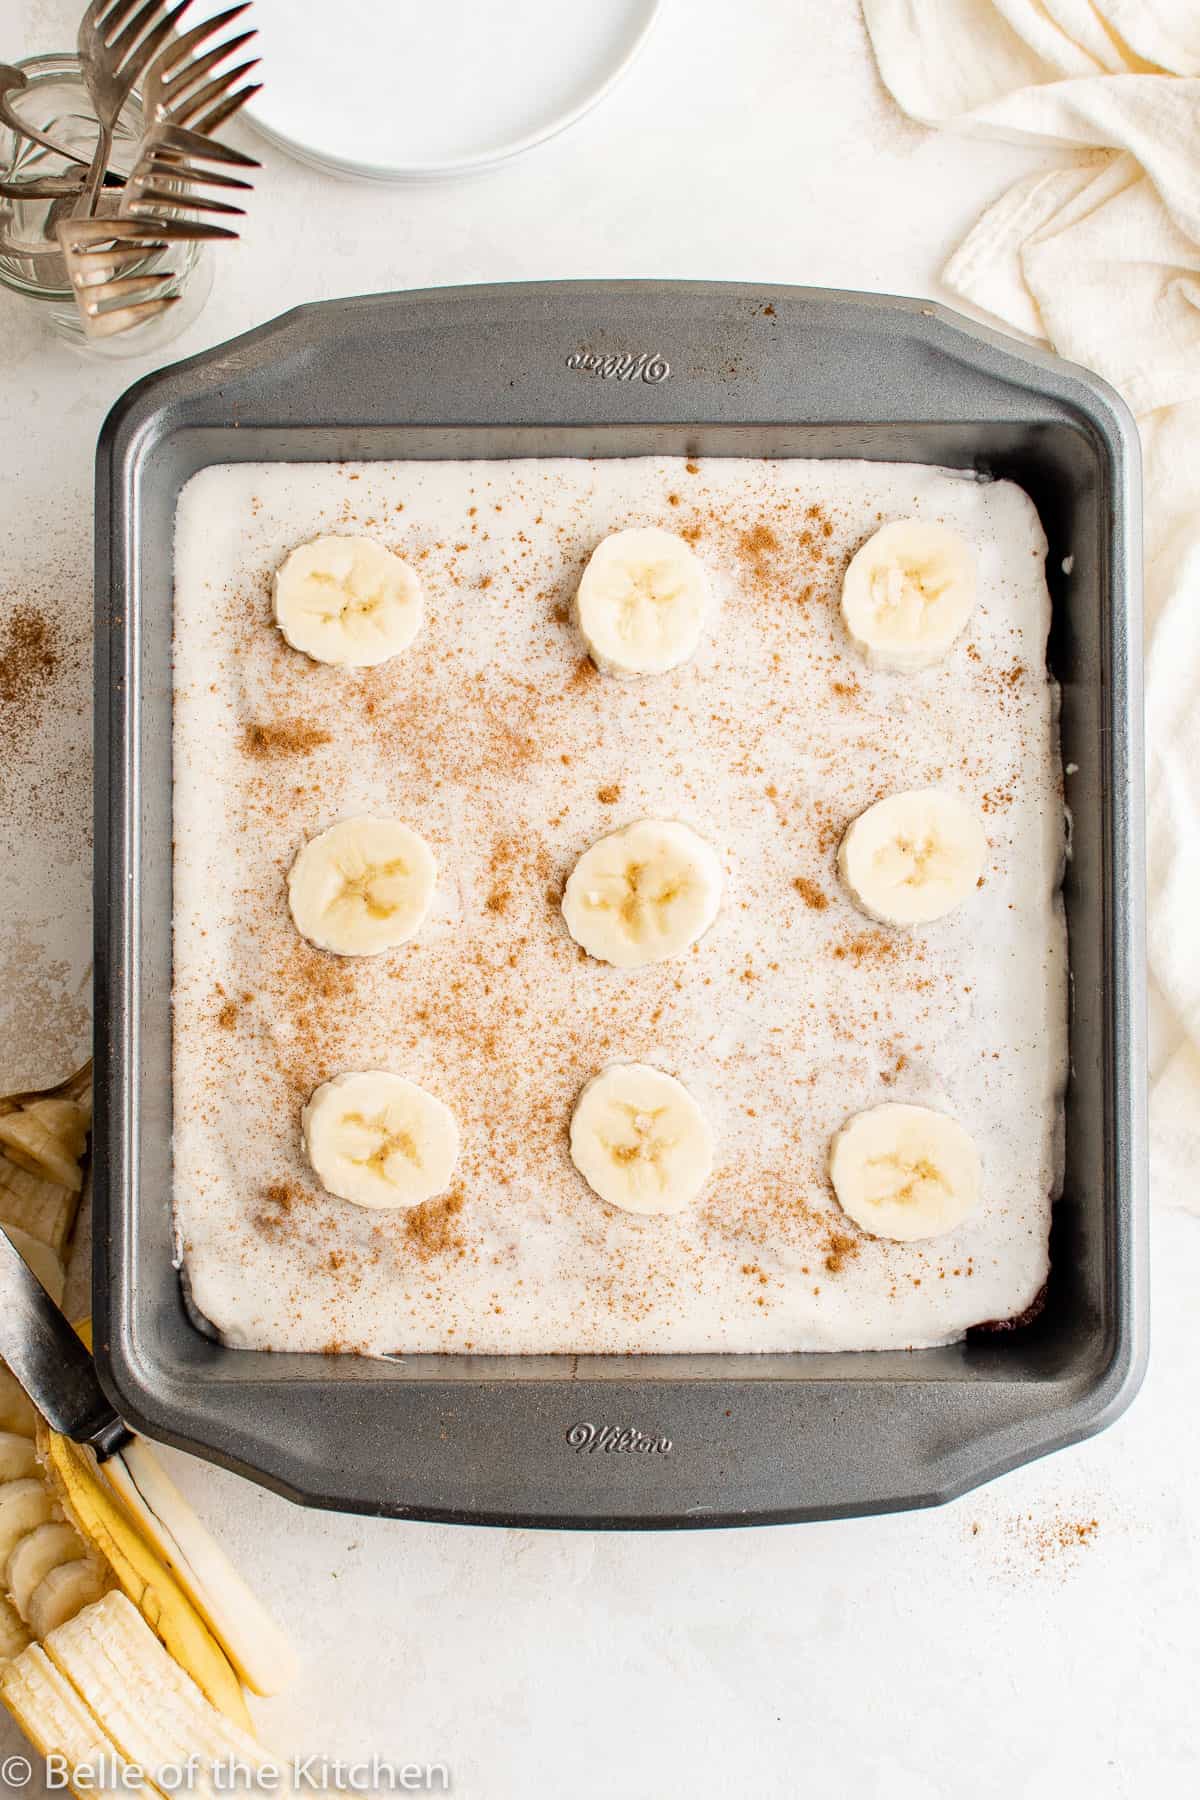 a cake in a metal baking pan topped with vanilla frosting and sliced bananas.